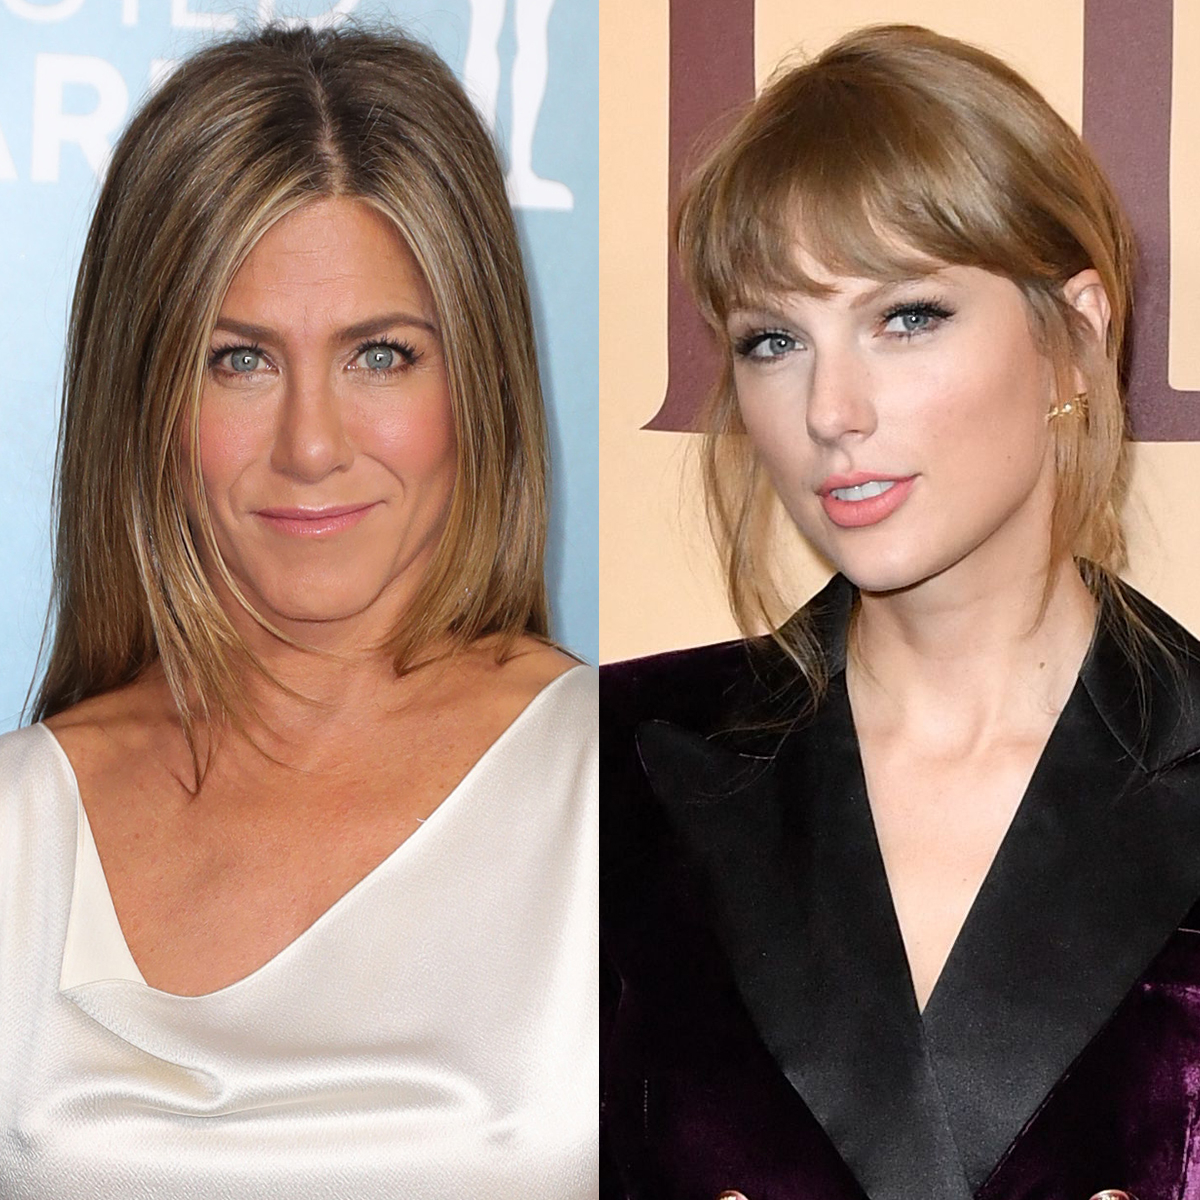 Who's Richer? Taylor Swift, Jennifer Aniston Or One Of These Other